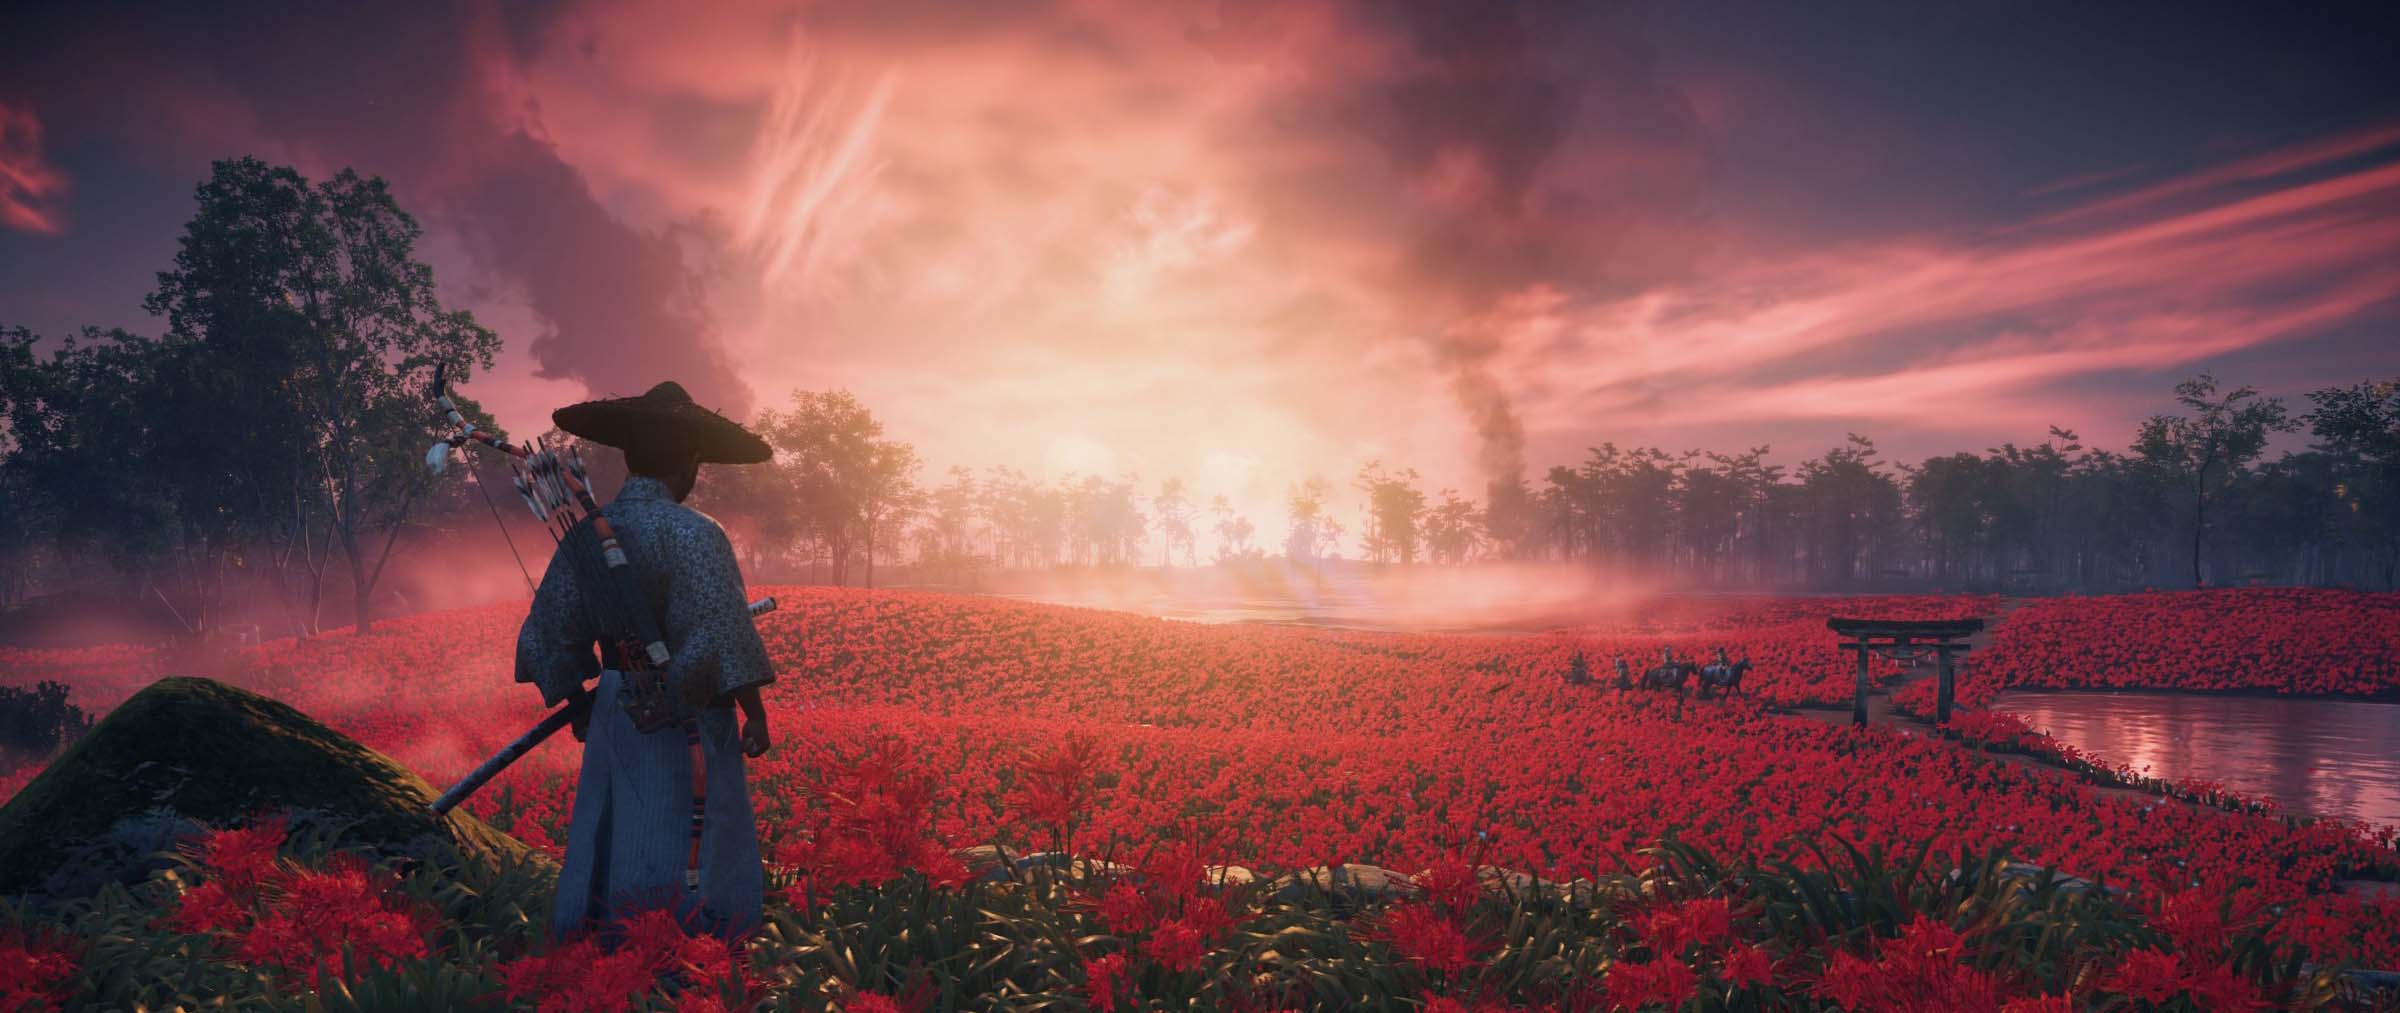 Ghosts of Tsushima - Samurai stands in a field of red flowers